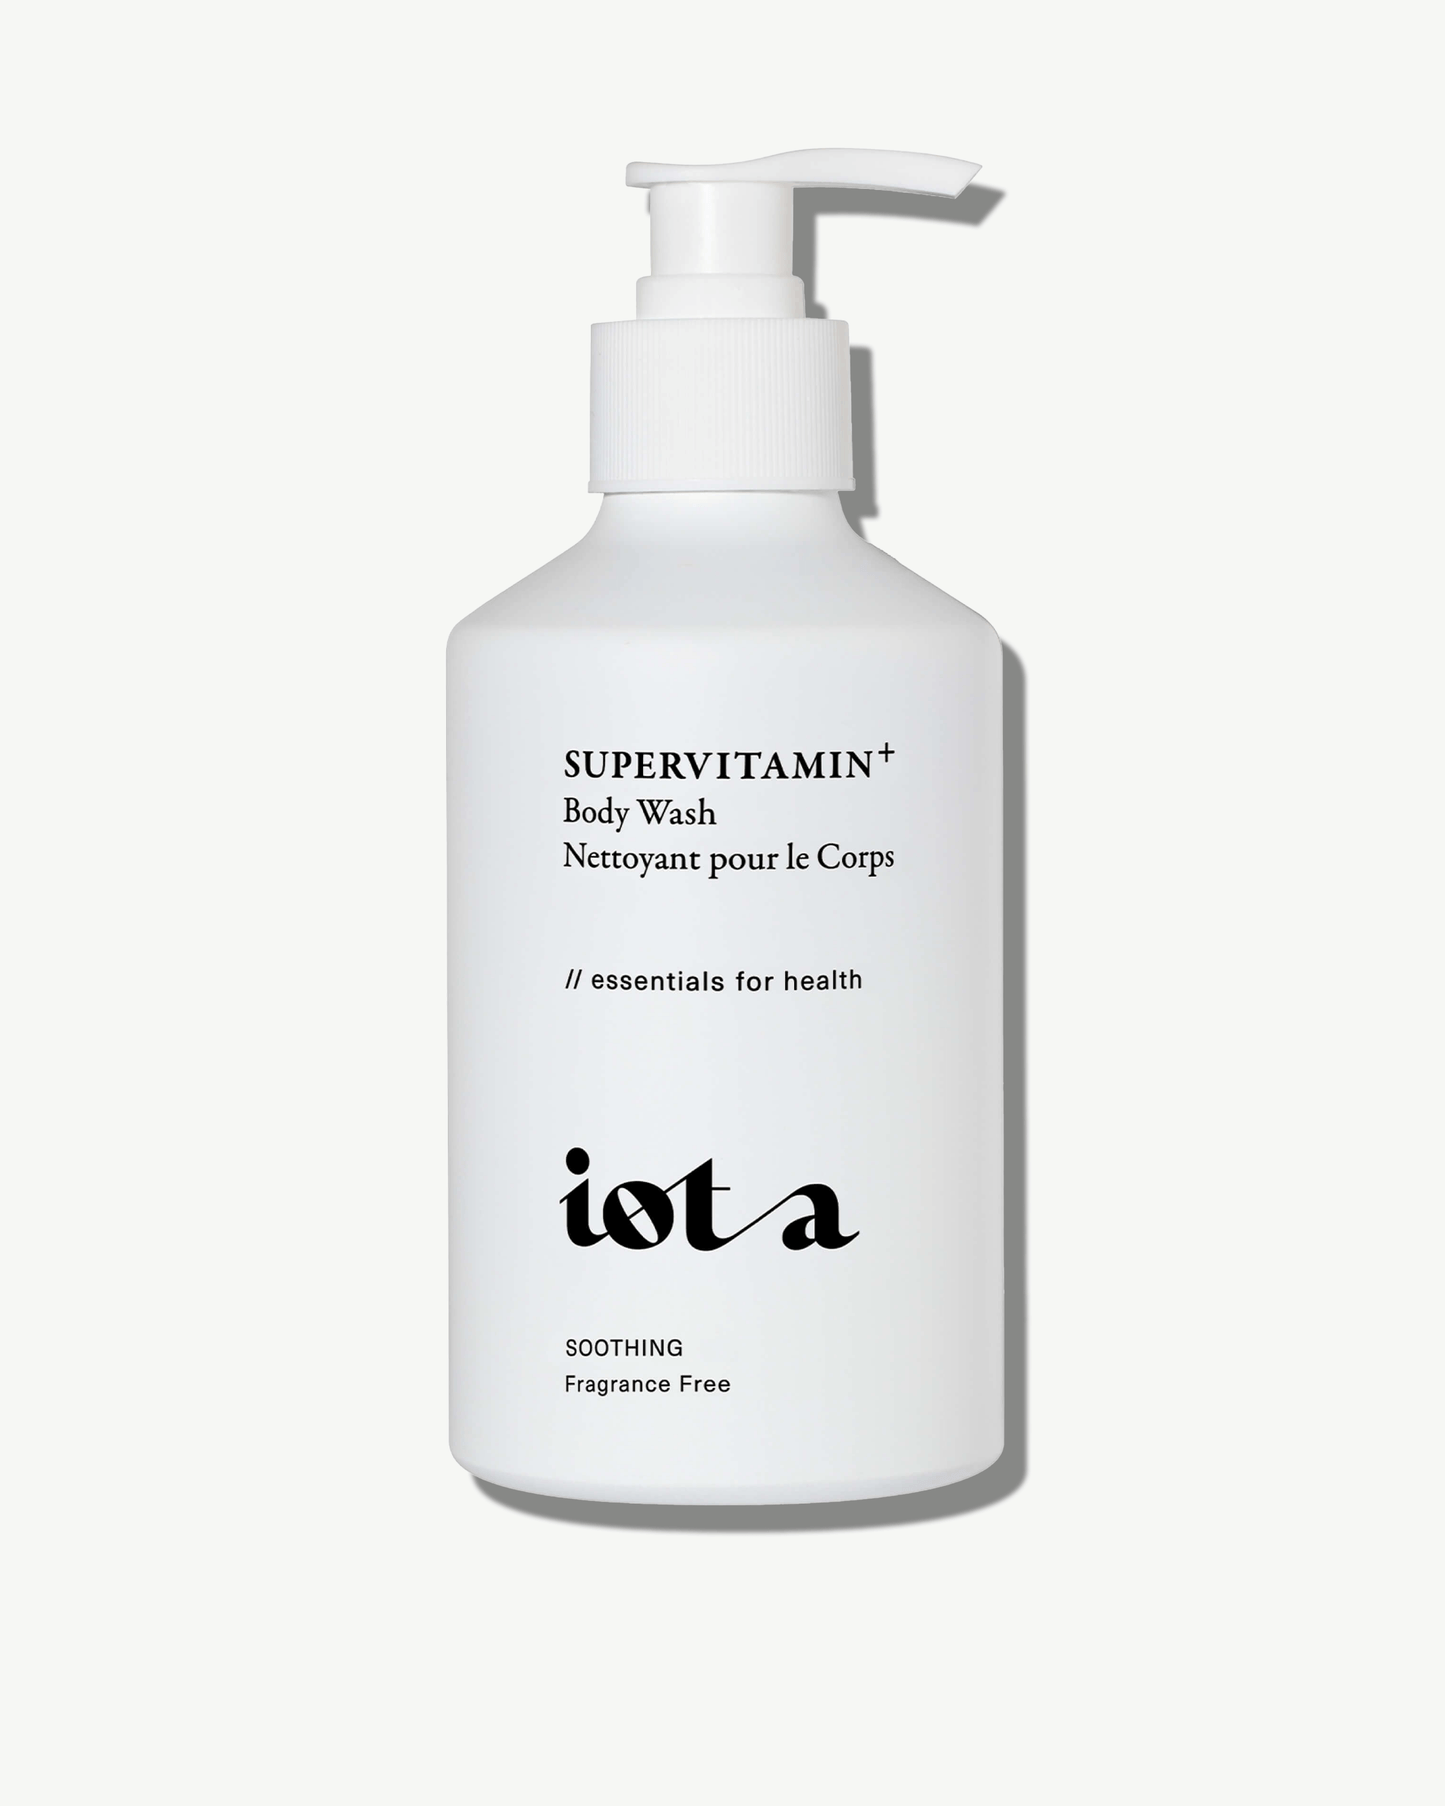 Supervitamin Body Wash+ Soothing